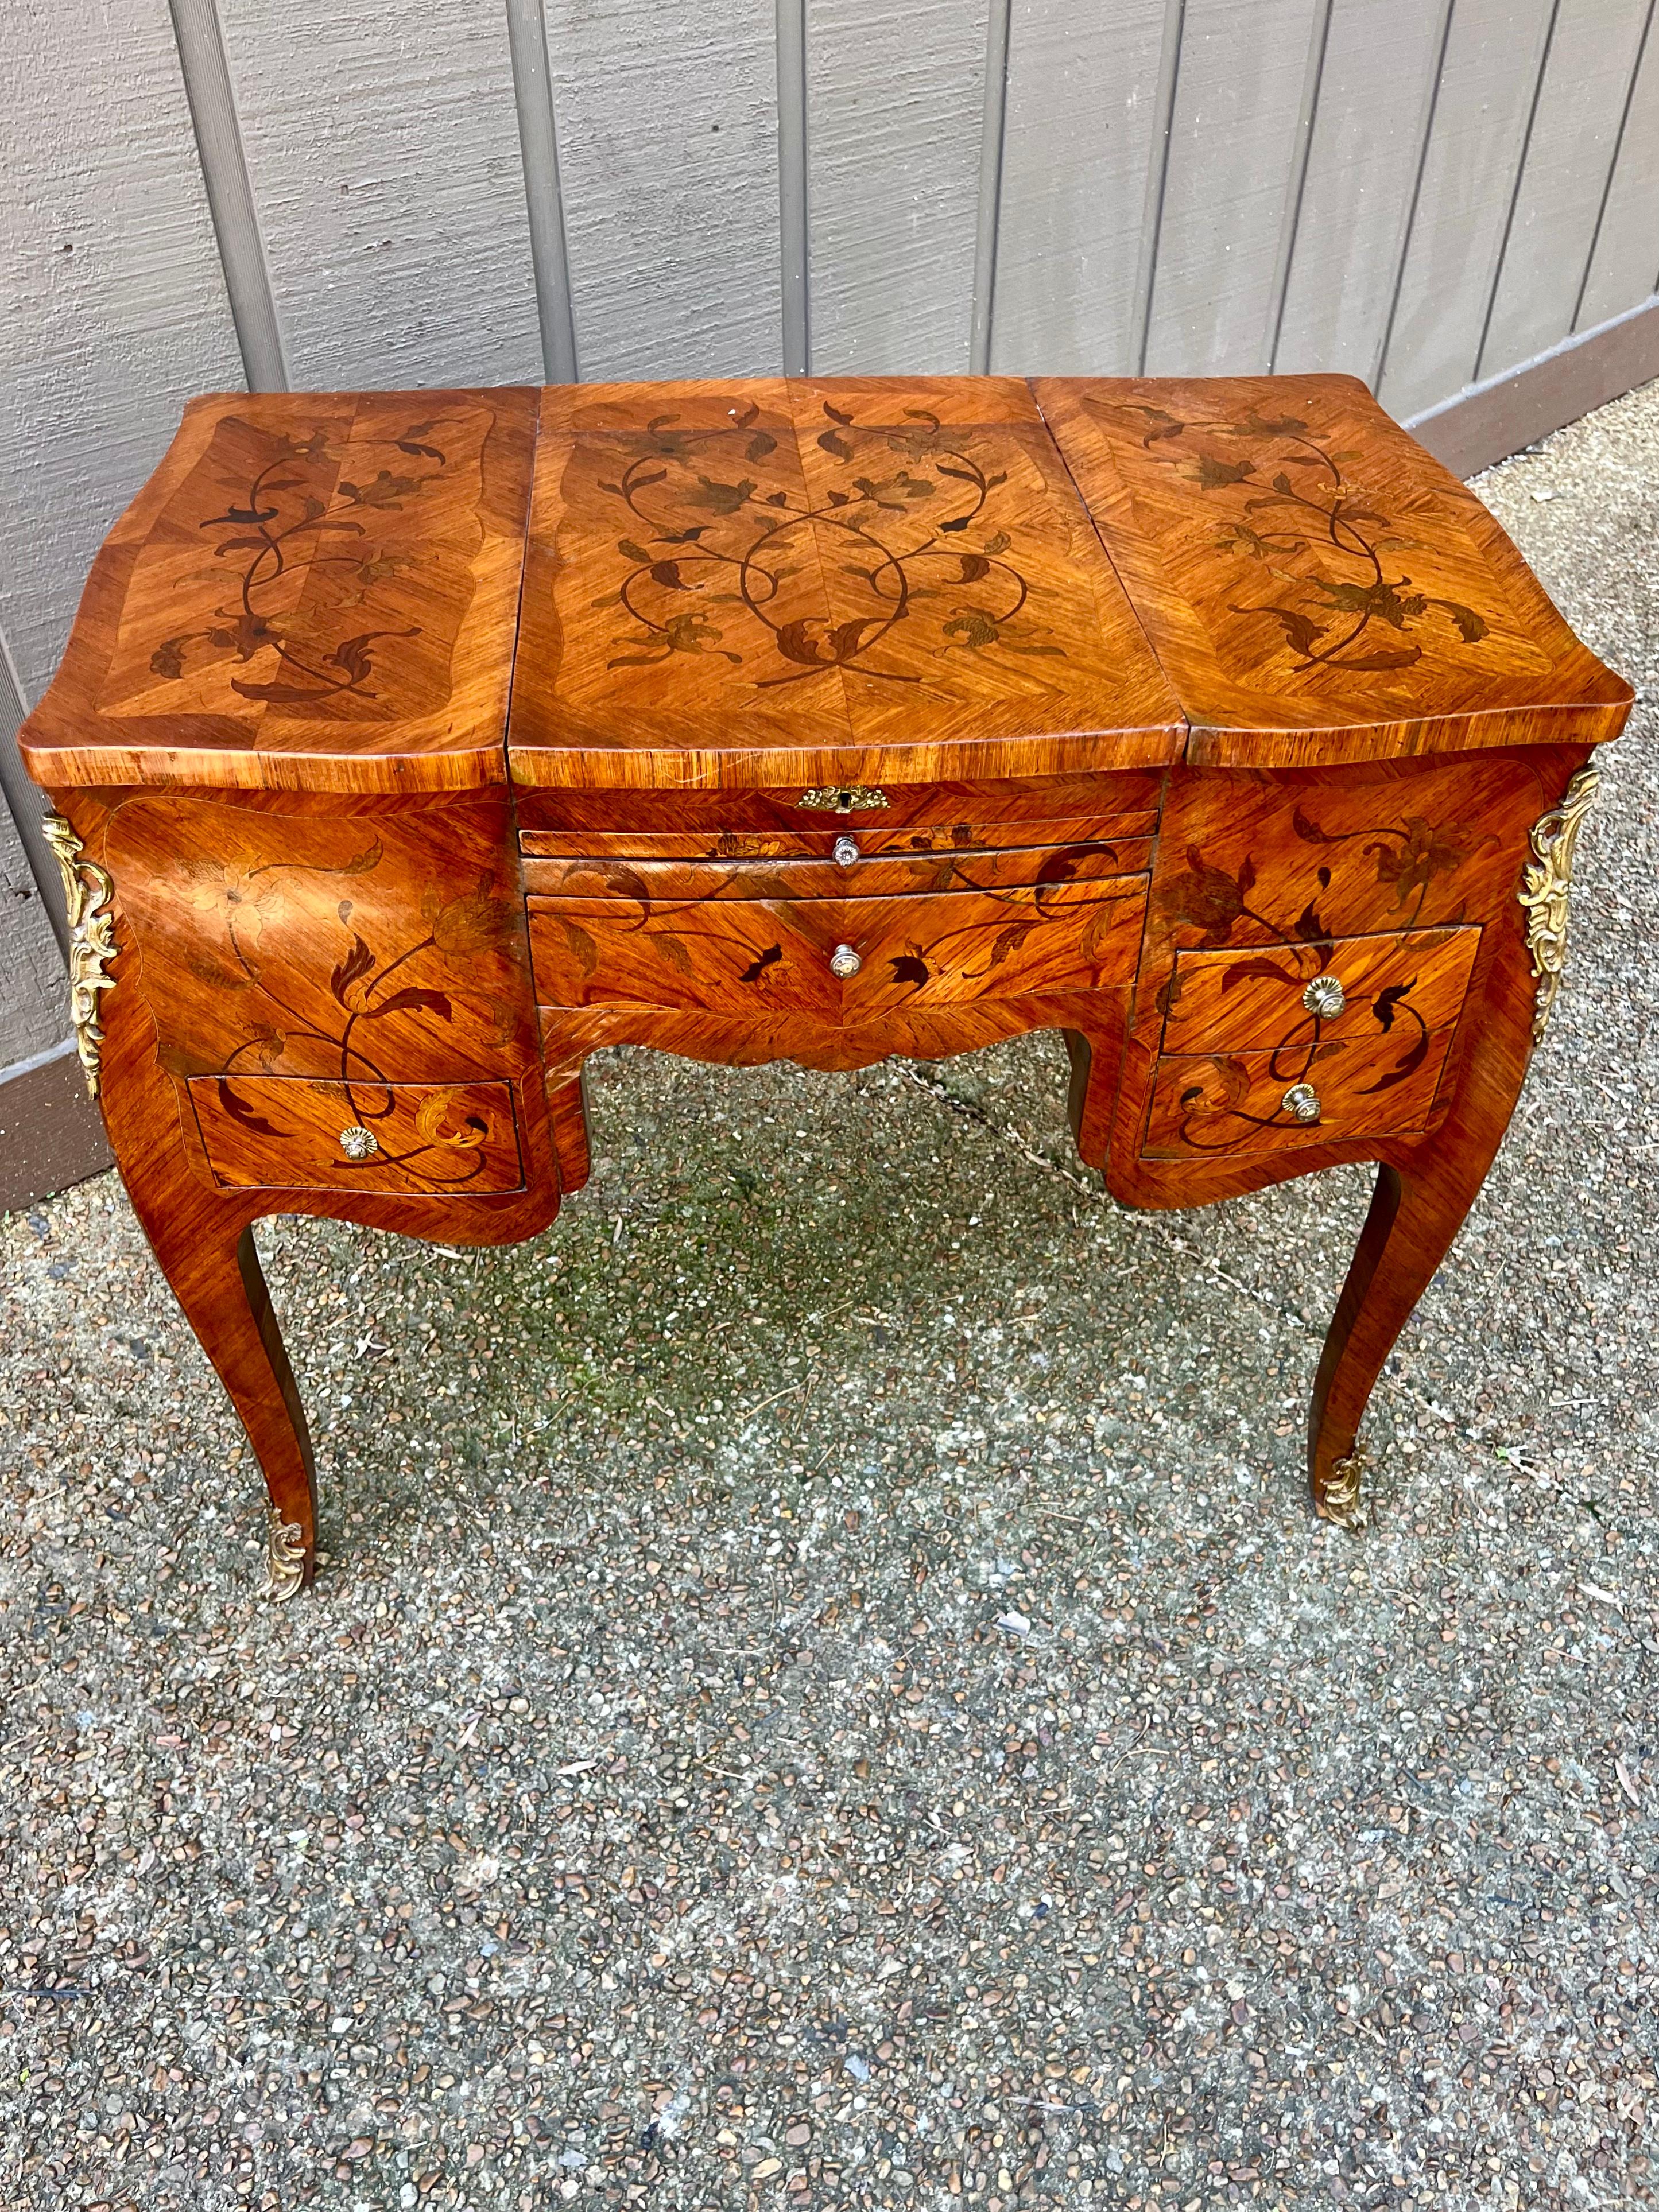 Louis Xv Transitional to LouisXvi Tulipwood Parquetry and Marquetry Floral Case  For Sale 2